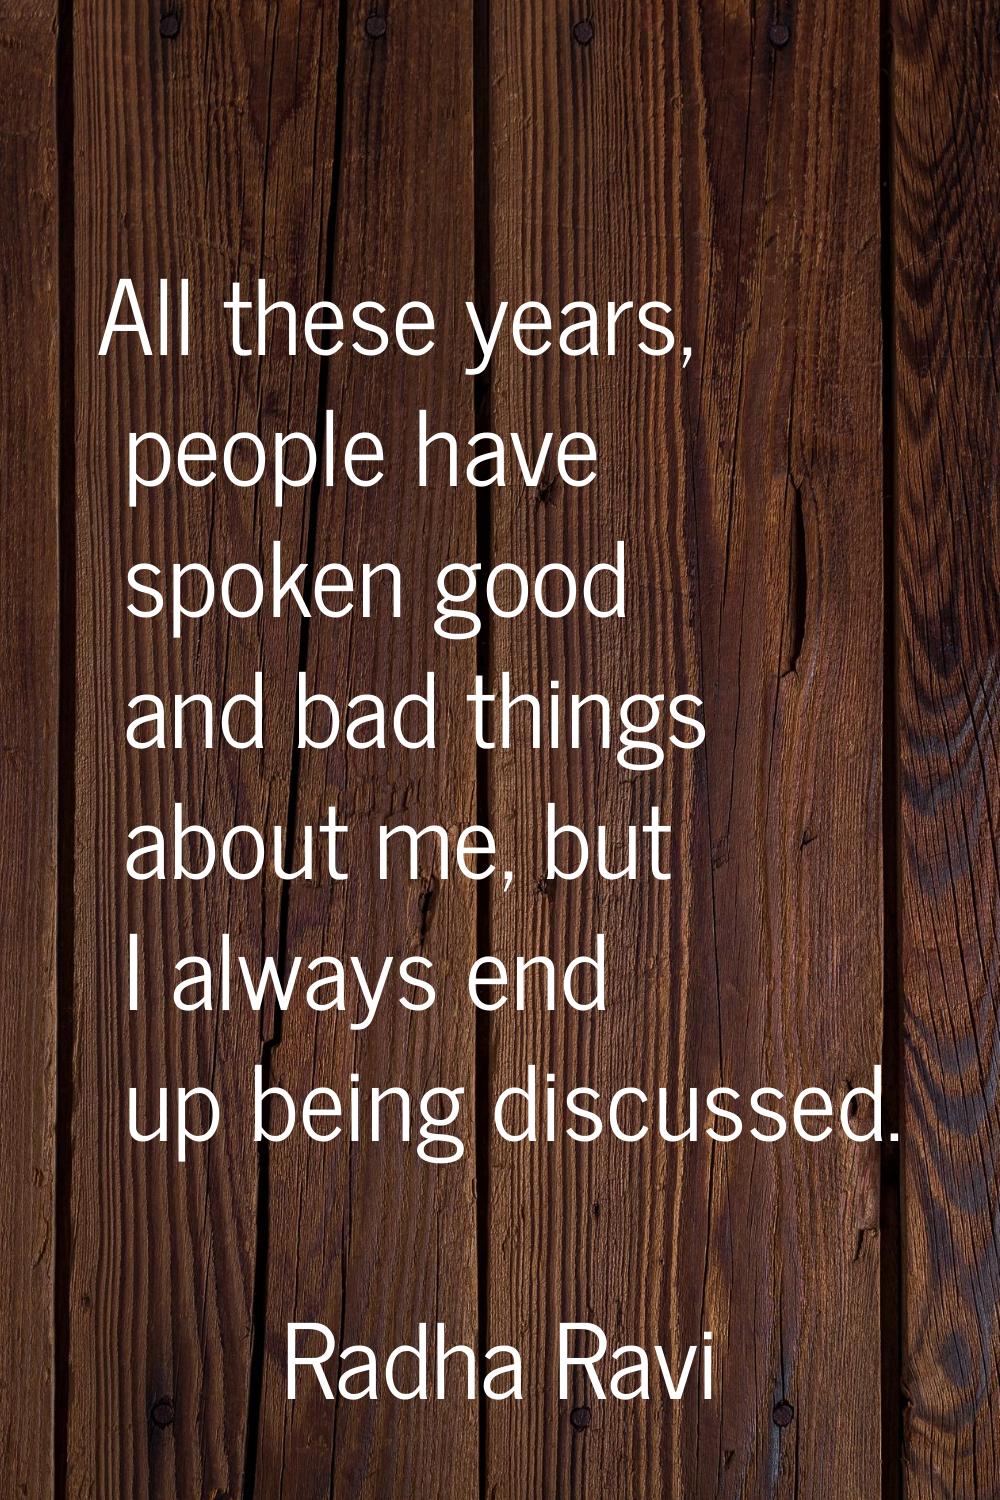 All these years, people have spoken good and bad things about me, but I always end up being discuss